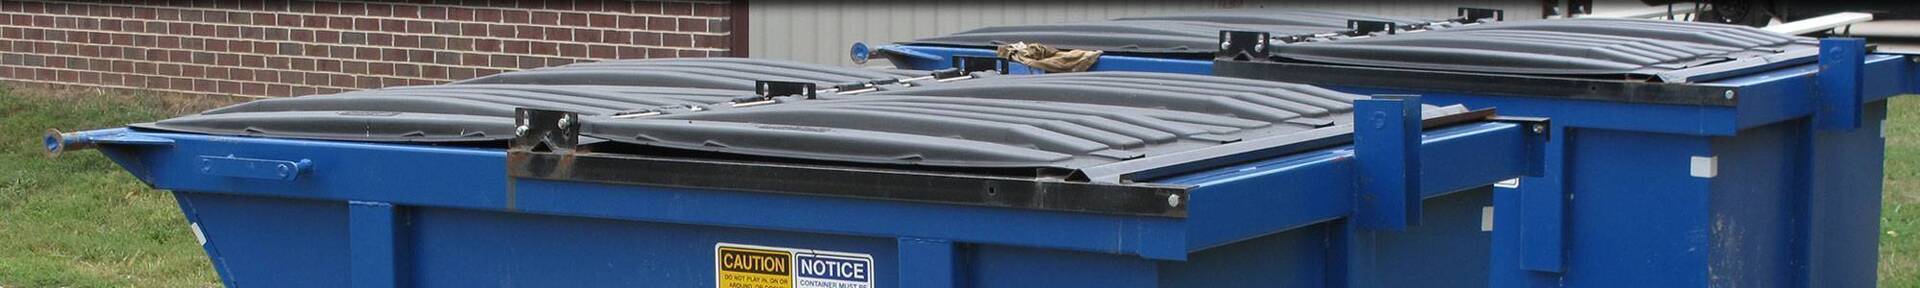 Temporary Dumpster Rental from TRM Disposal